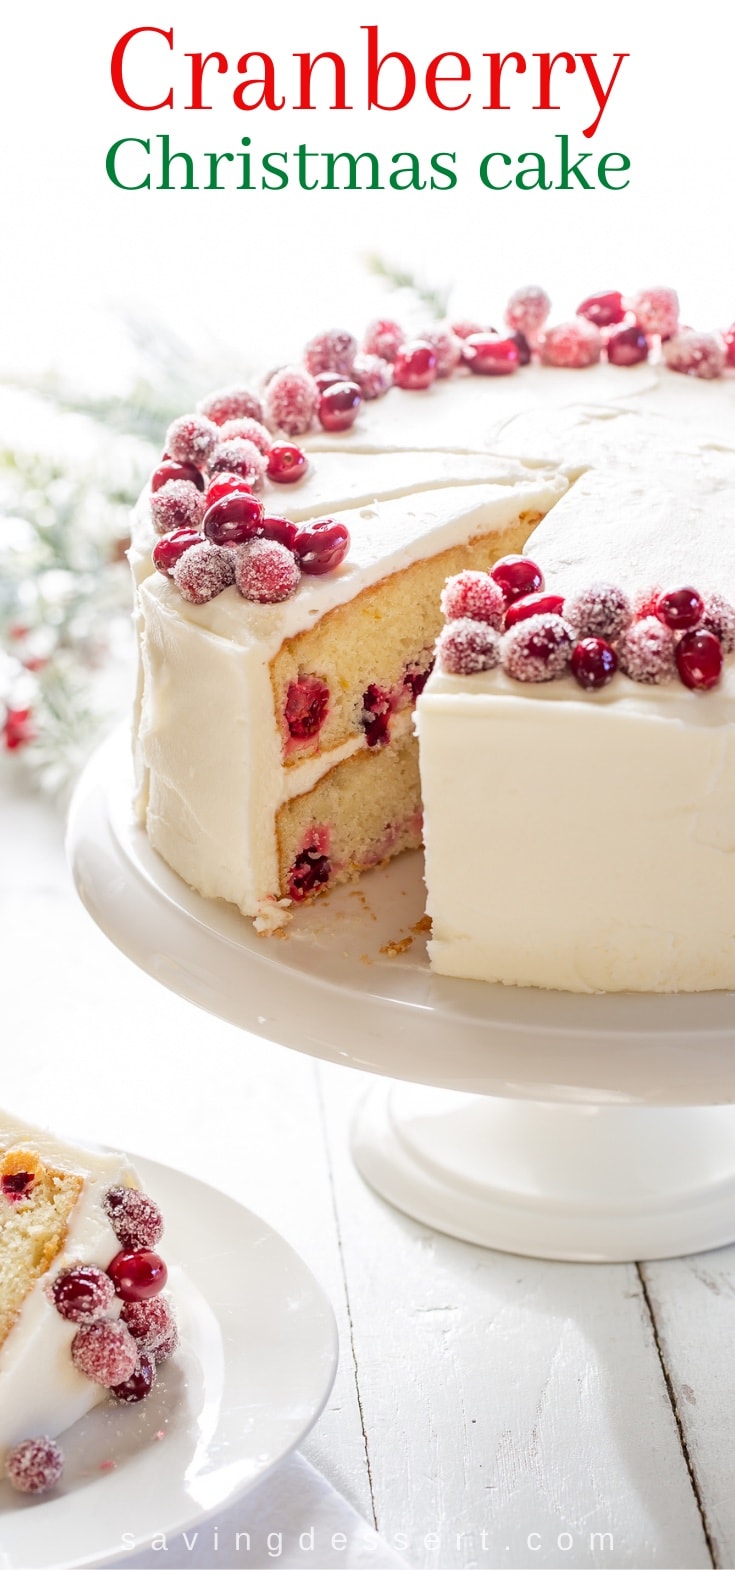 An orange and cranberry layer cake on a cake stand sliced showing the inside layers